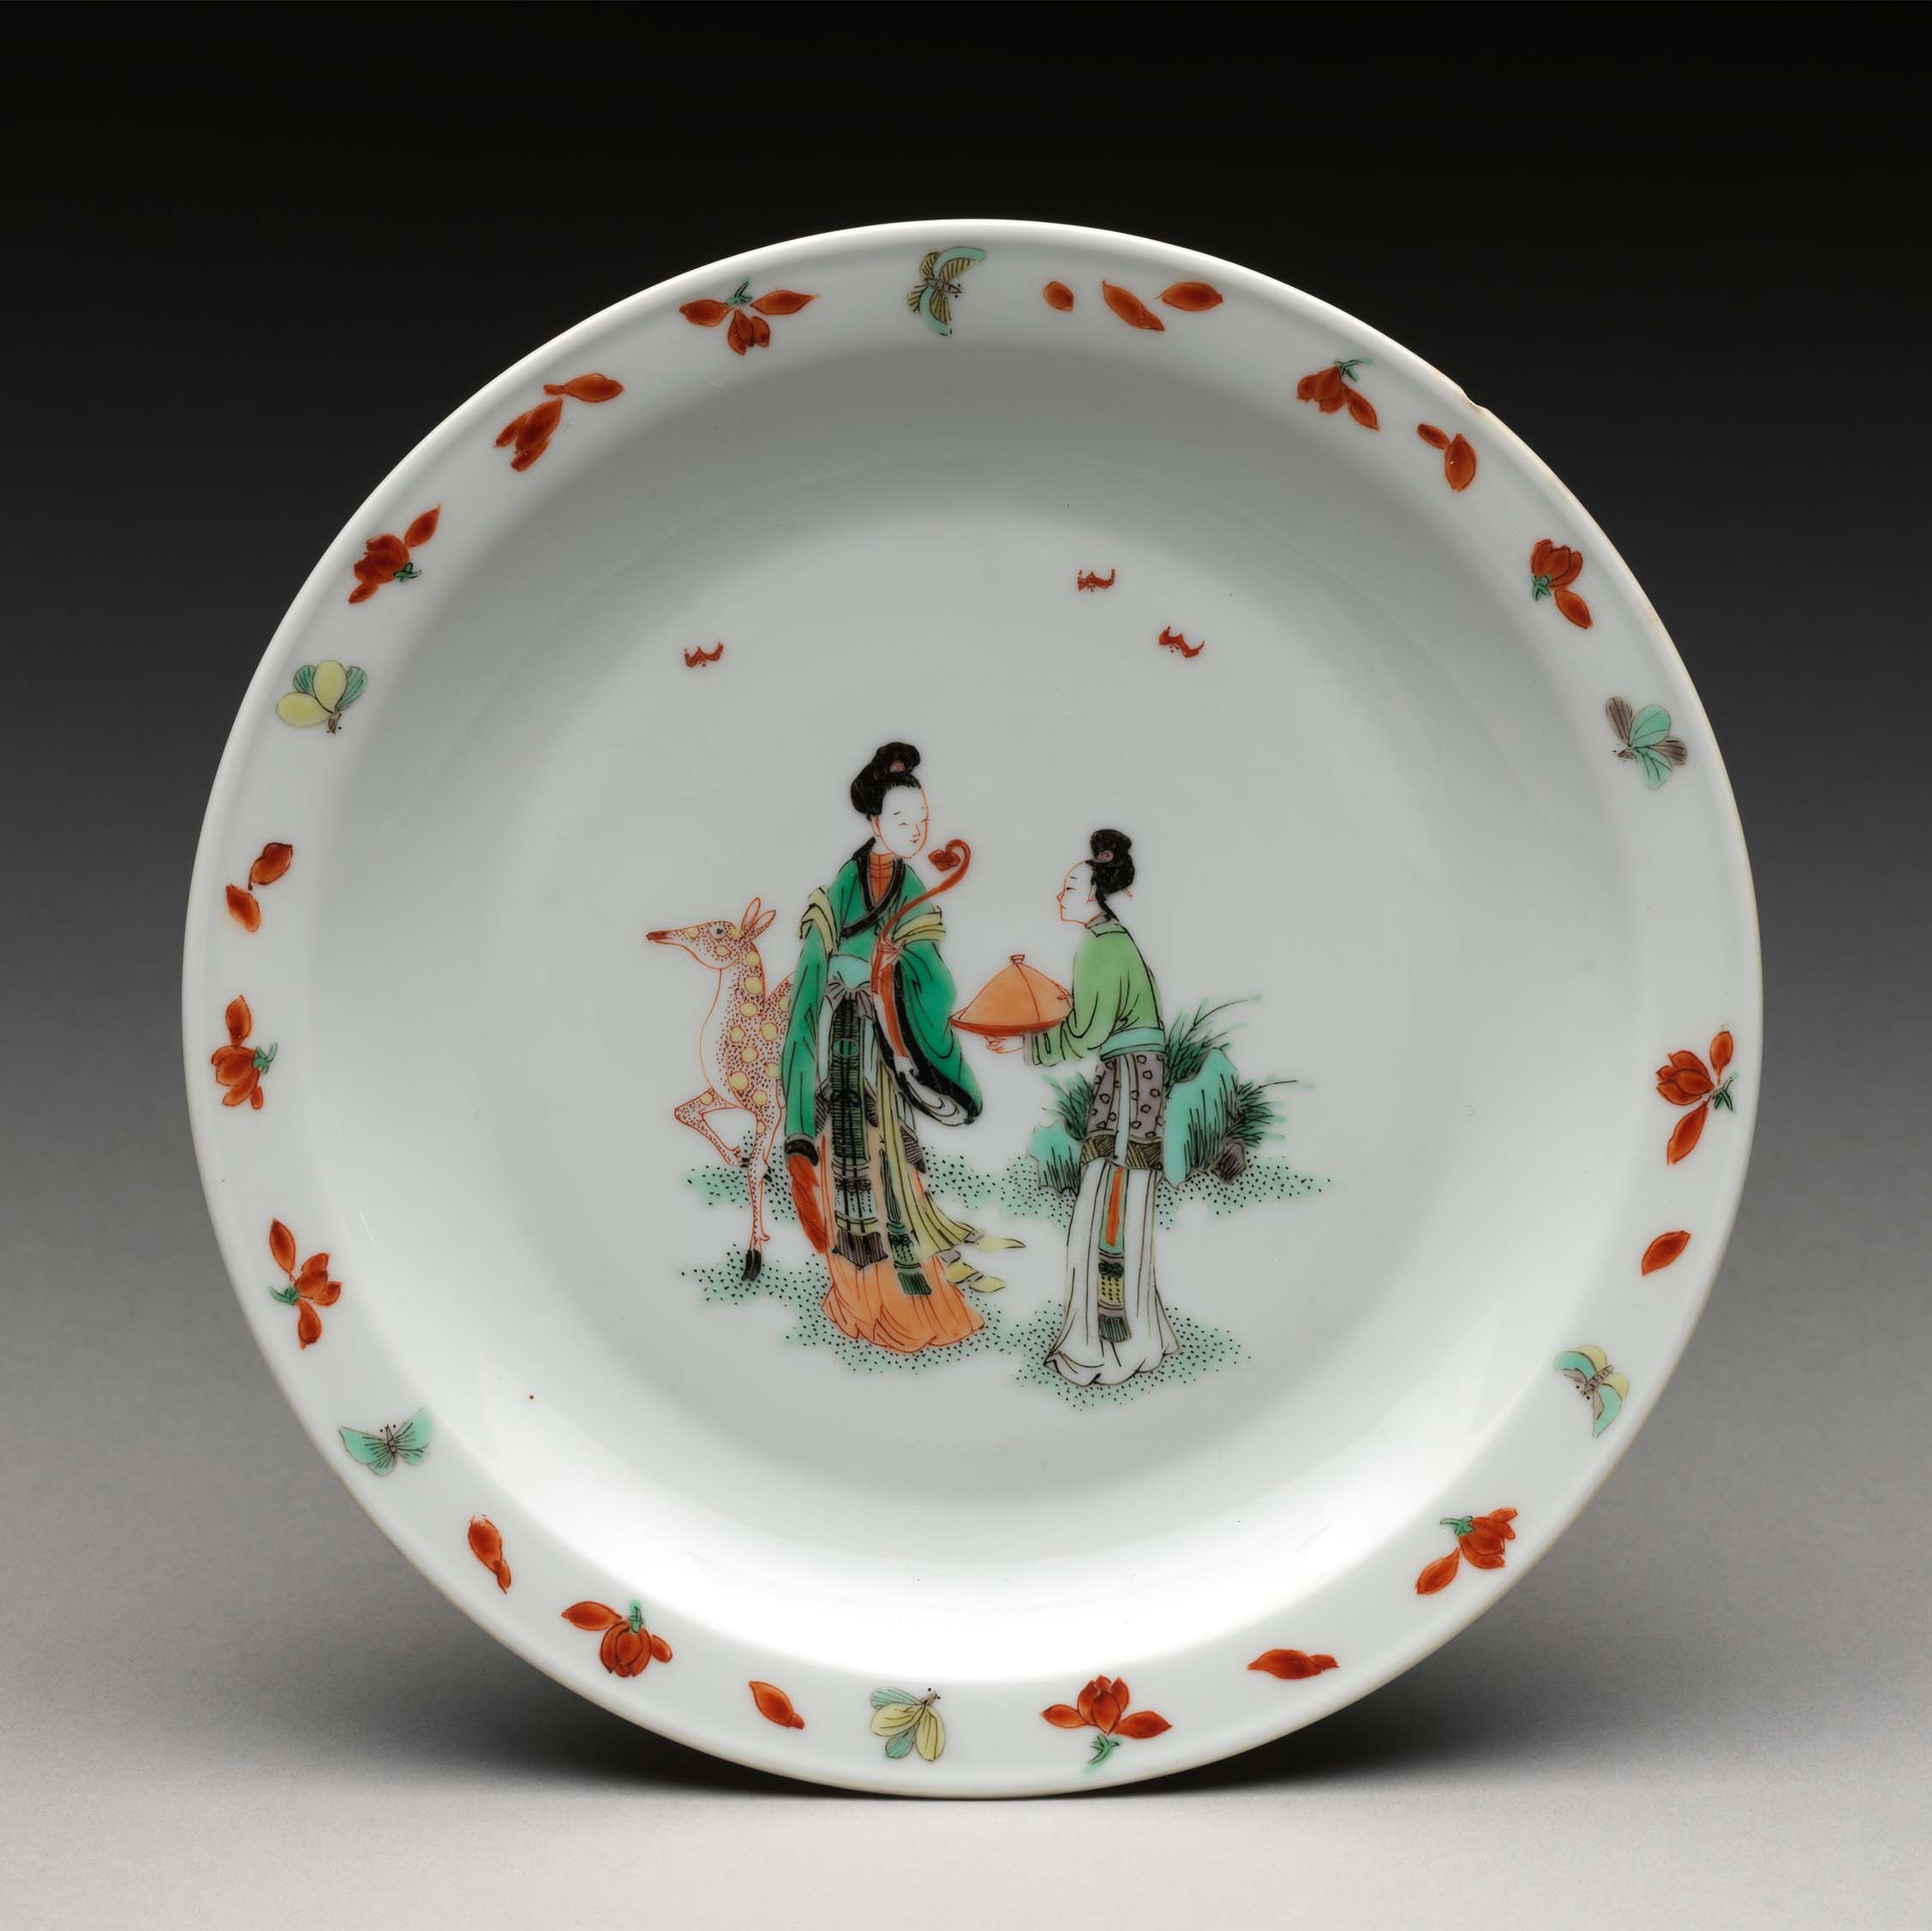 The original Plate with Fairies by Unknown artist